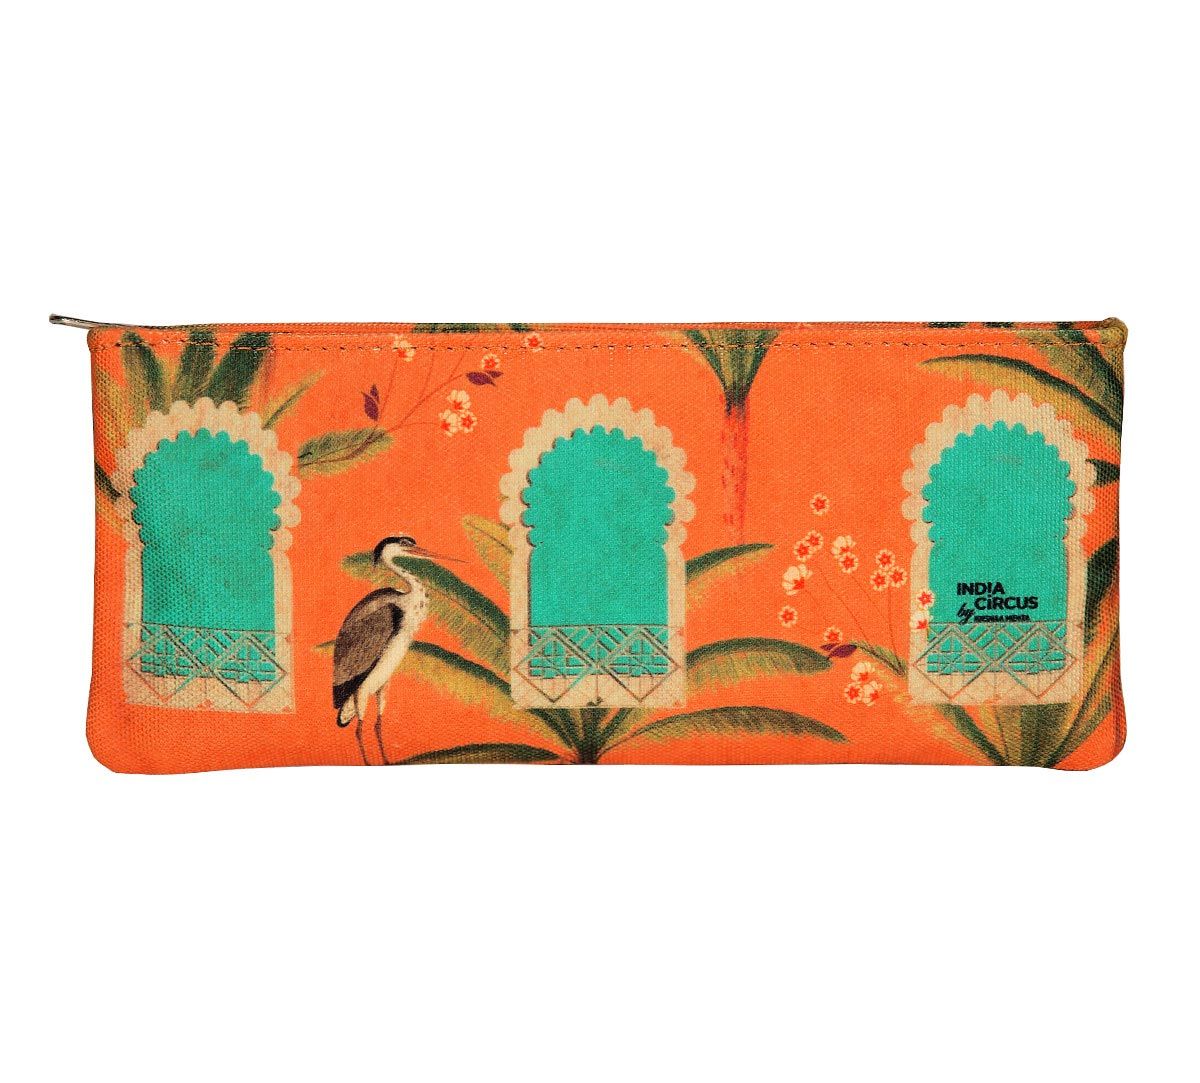 India Circus Heron's Palace Small Utility Pouch